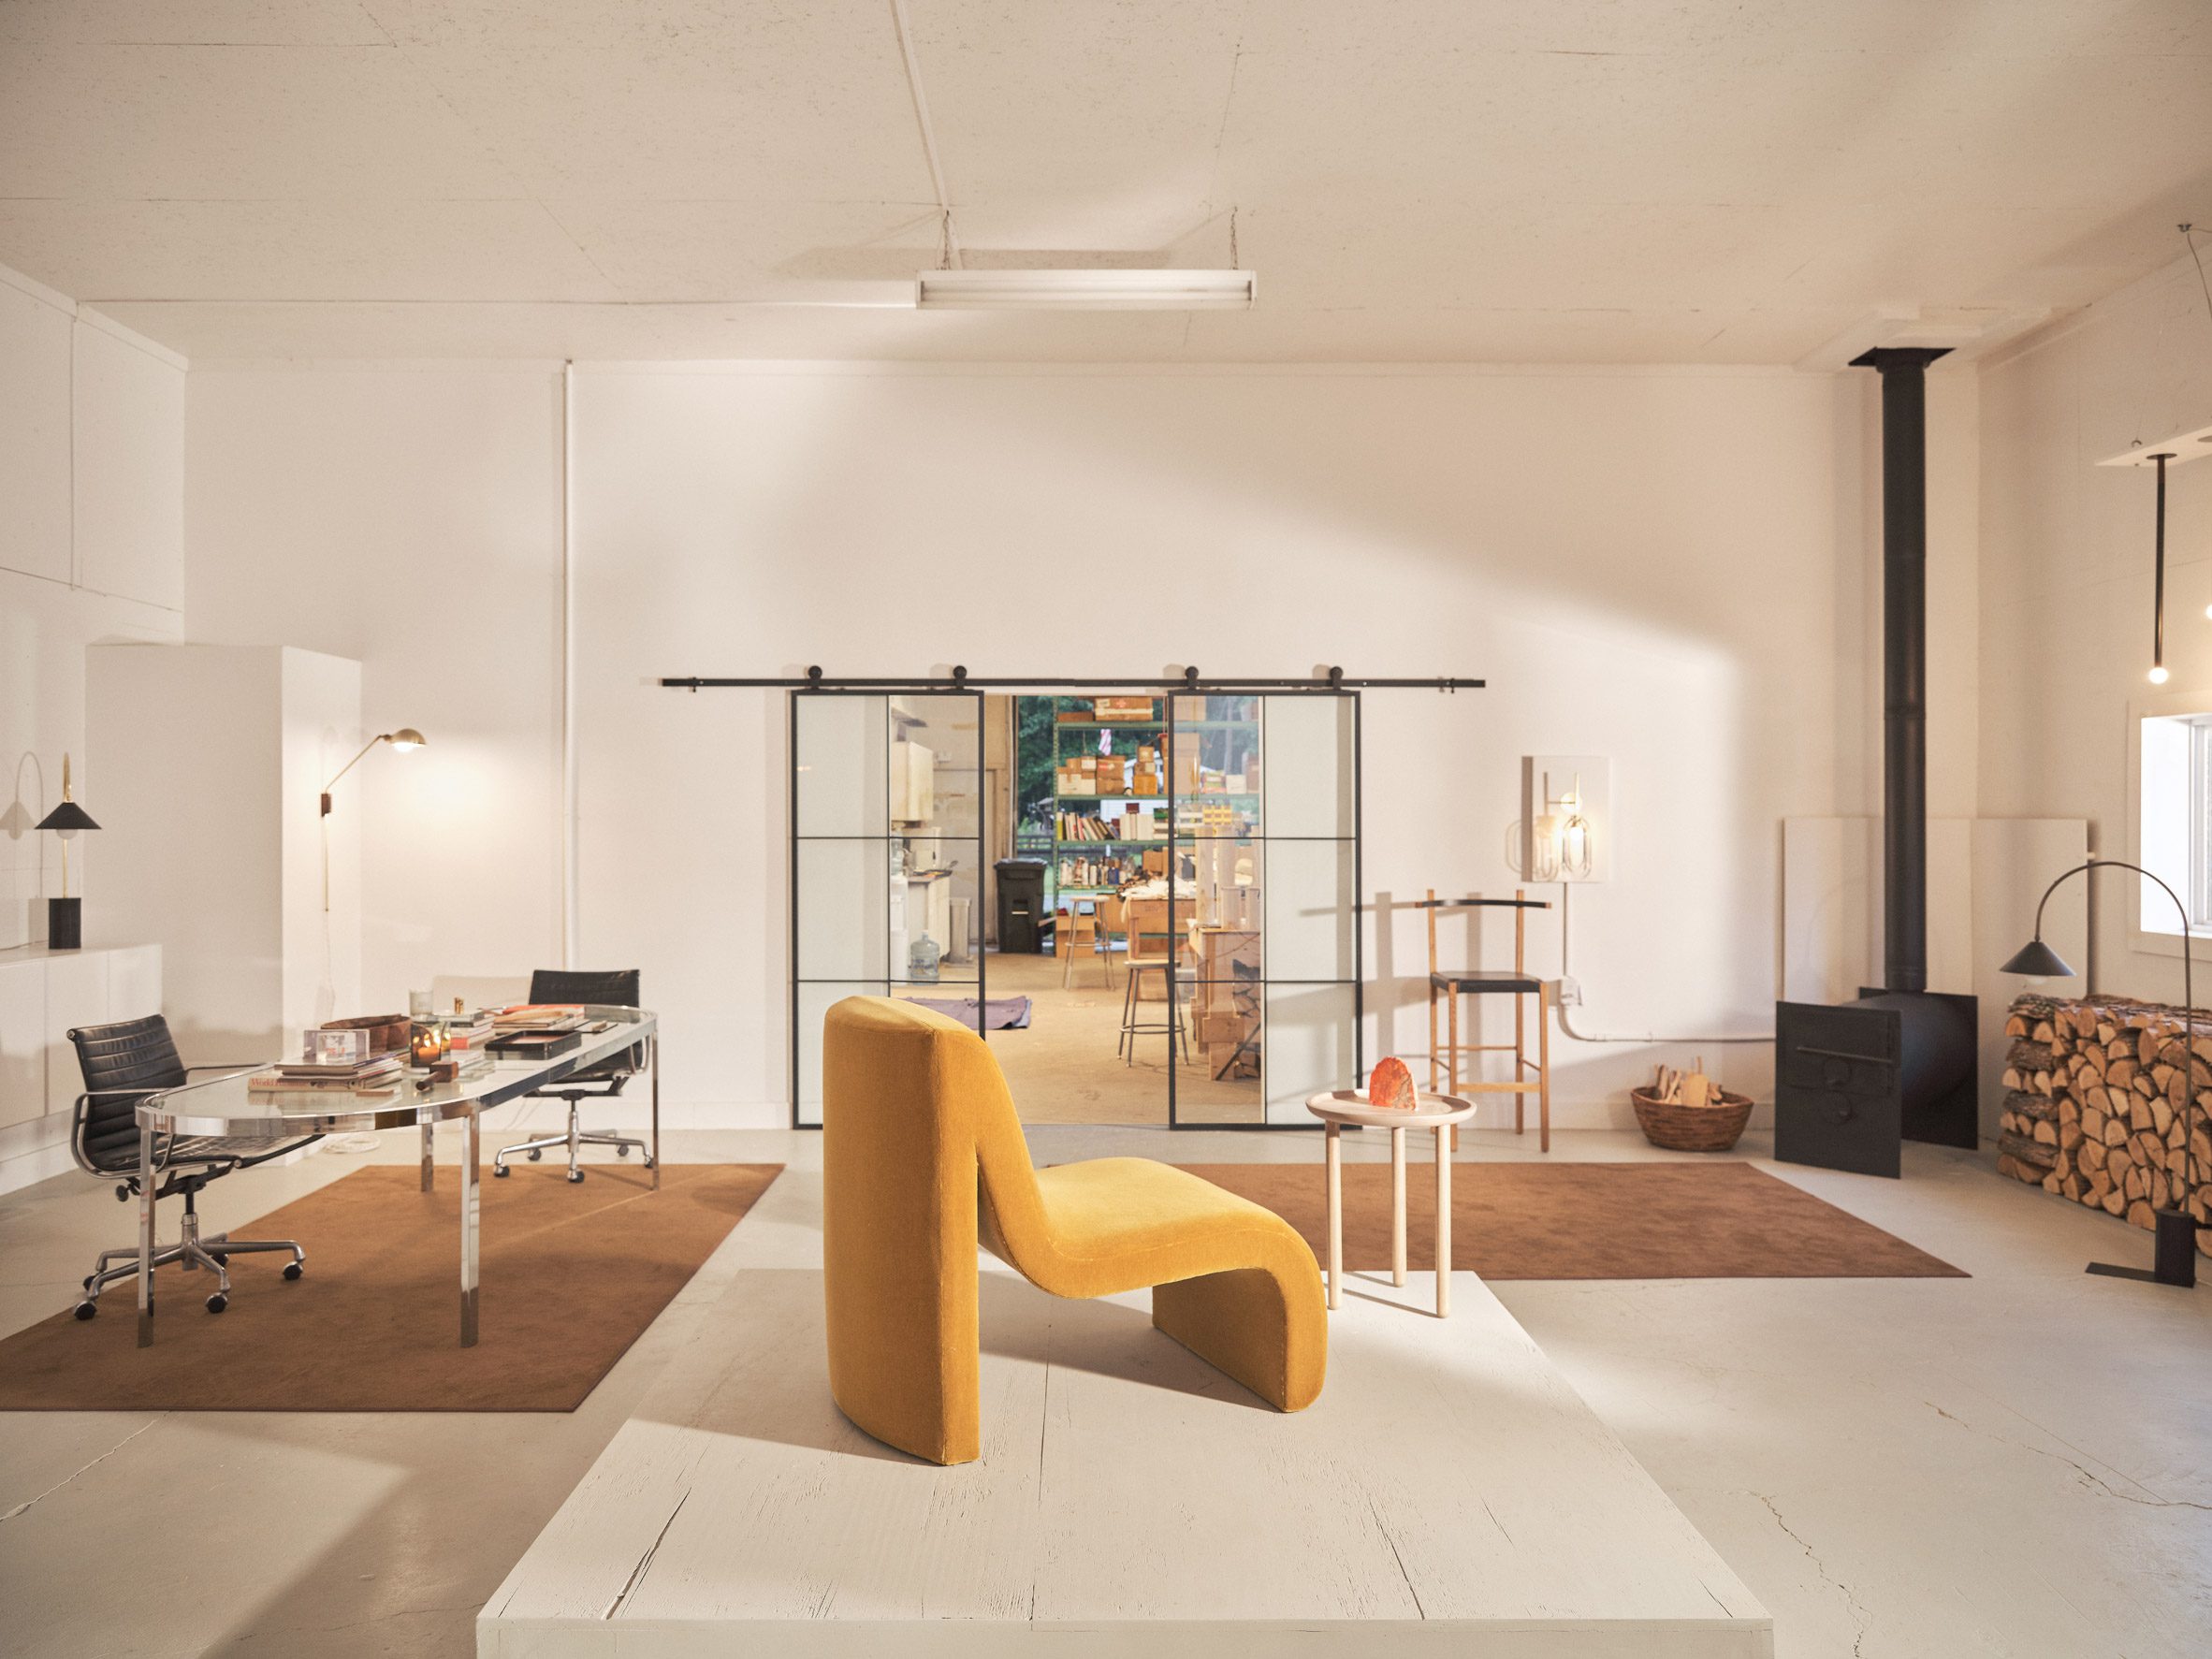 Wide shot of the showroom with yellow chair in the foreground